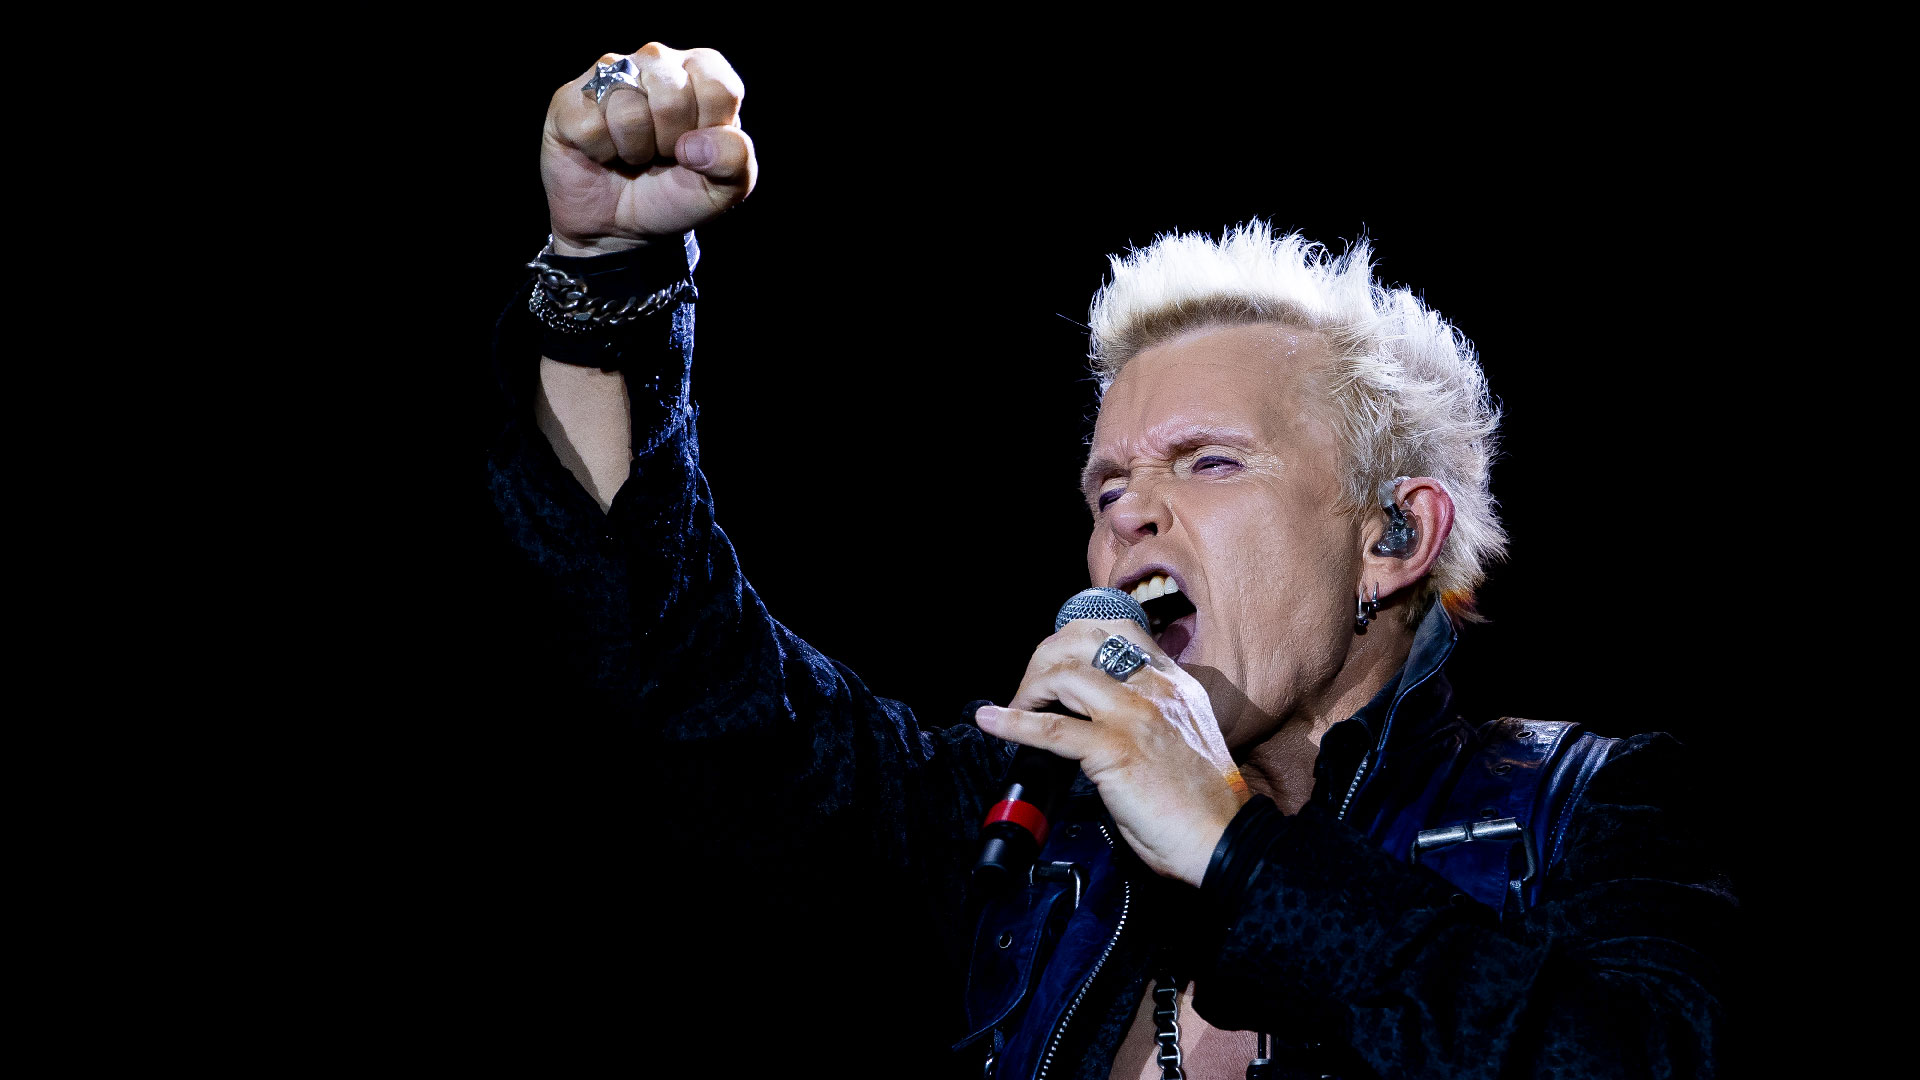 Billy Idol performs at the Mundo Stage during the Rock in Rio Festival at Cidade do Rock on September 09, 2022 in Rio de Janeiro, Brazil.